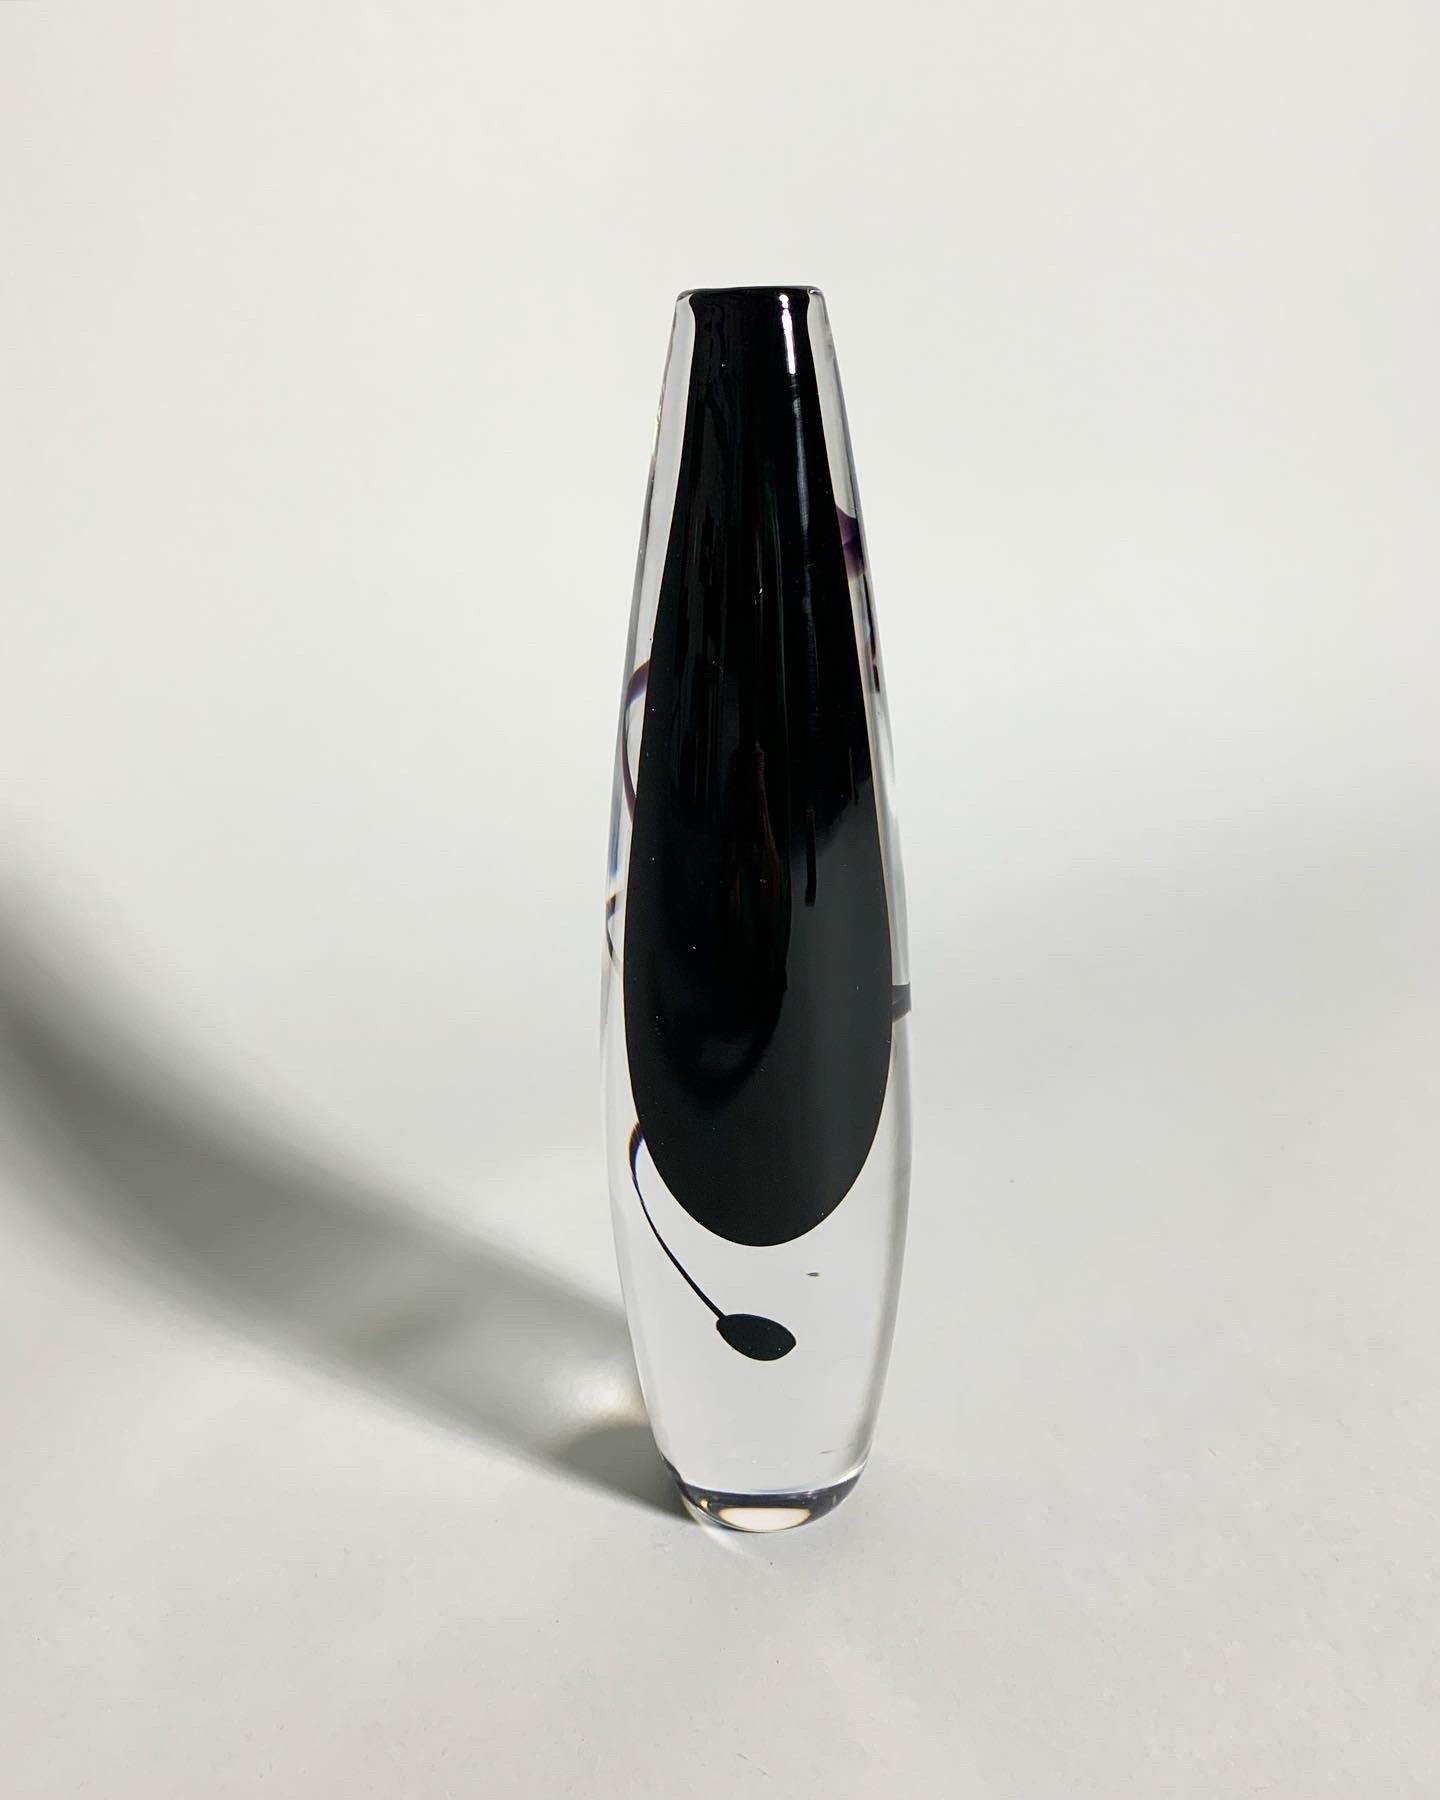 Rare Vicke Lindstrand spiral vase in dark purple, almost black glass, mouth-blown and hand-crafted at Kosta glassworks in the early 1960s.

Signed underneath with the artists initials and the model number „1412“.

Height: 26.5 cm
Diameter: 7 cm